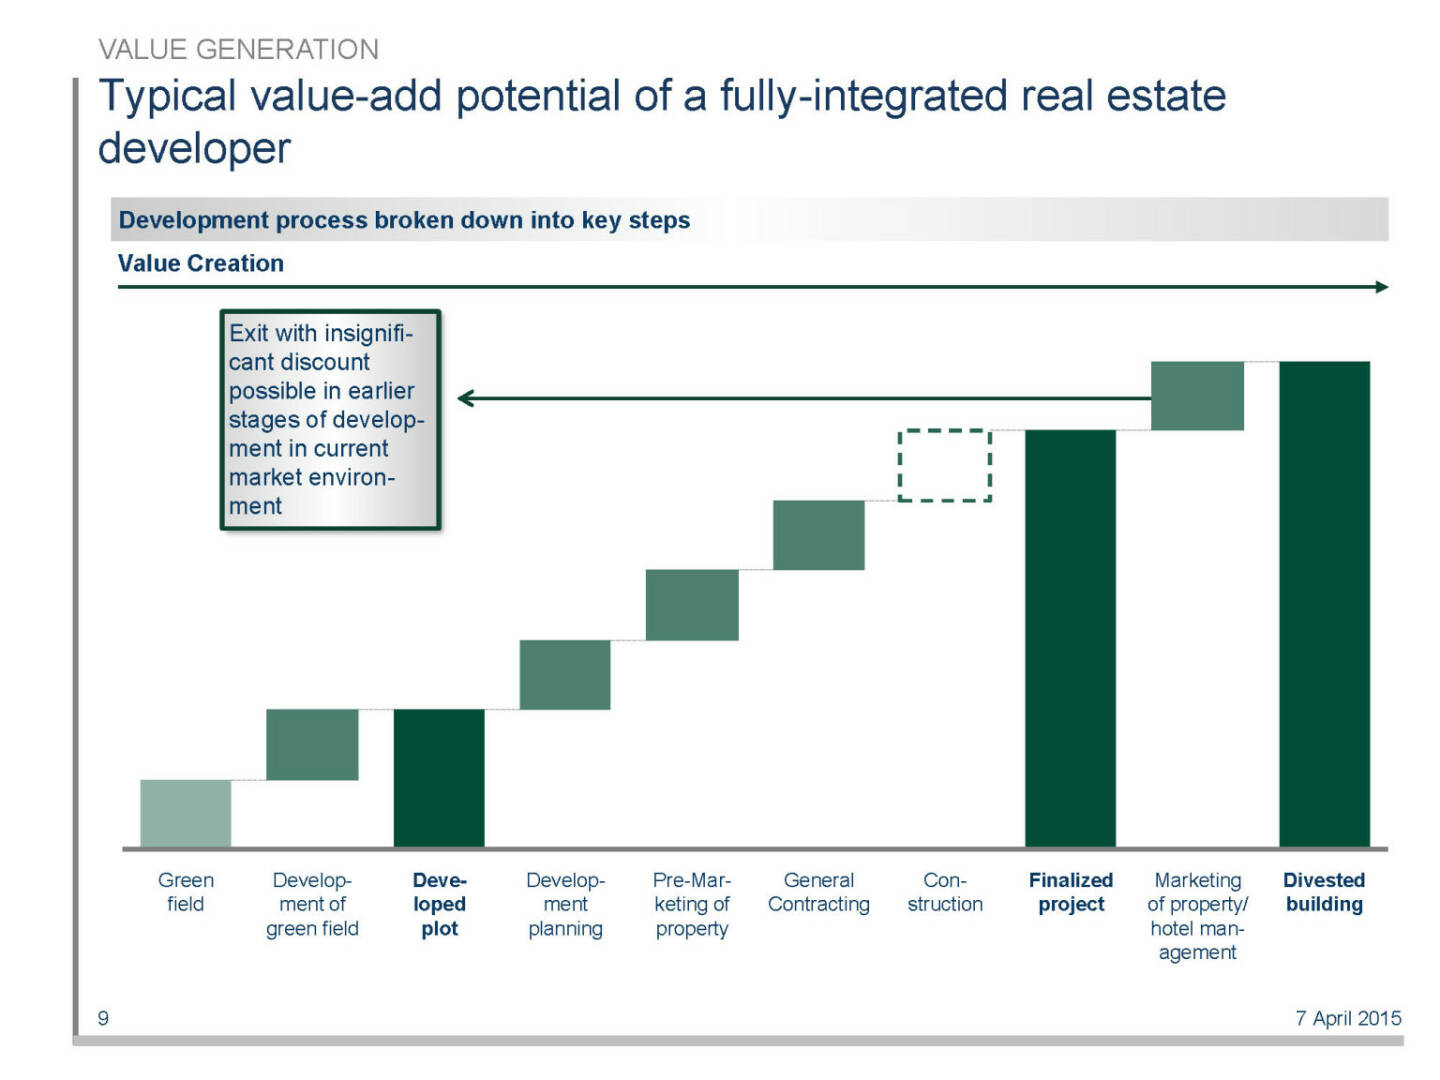 Typical value-add potential of a fully-integrated real estate developer